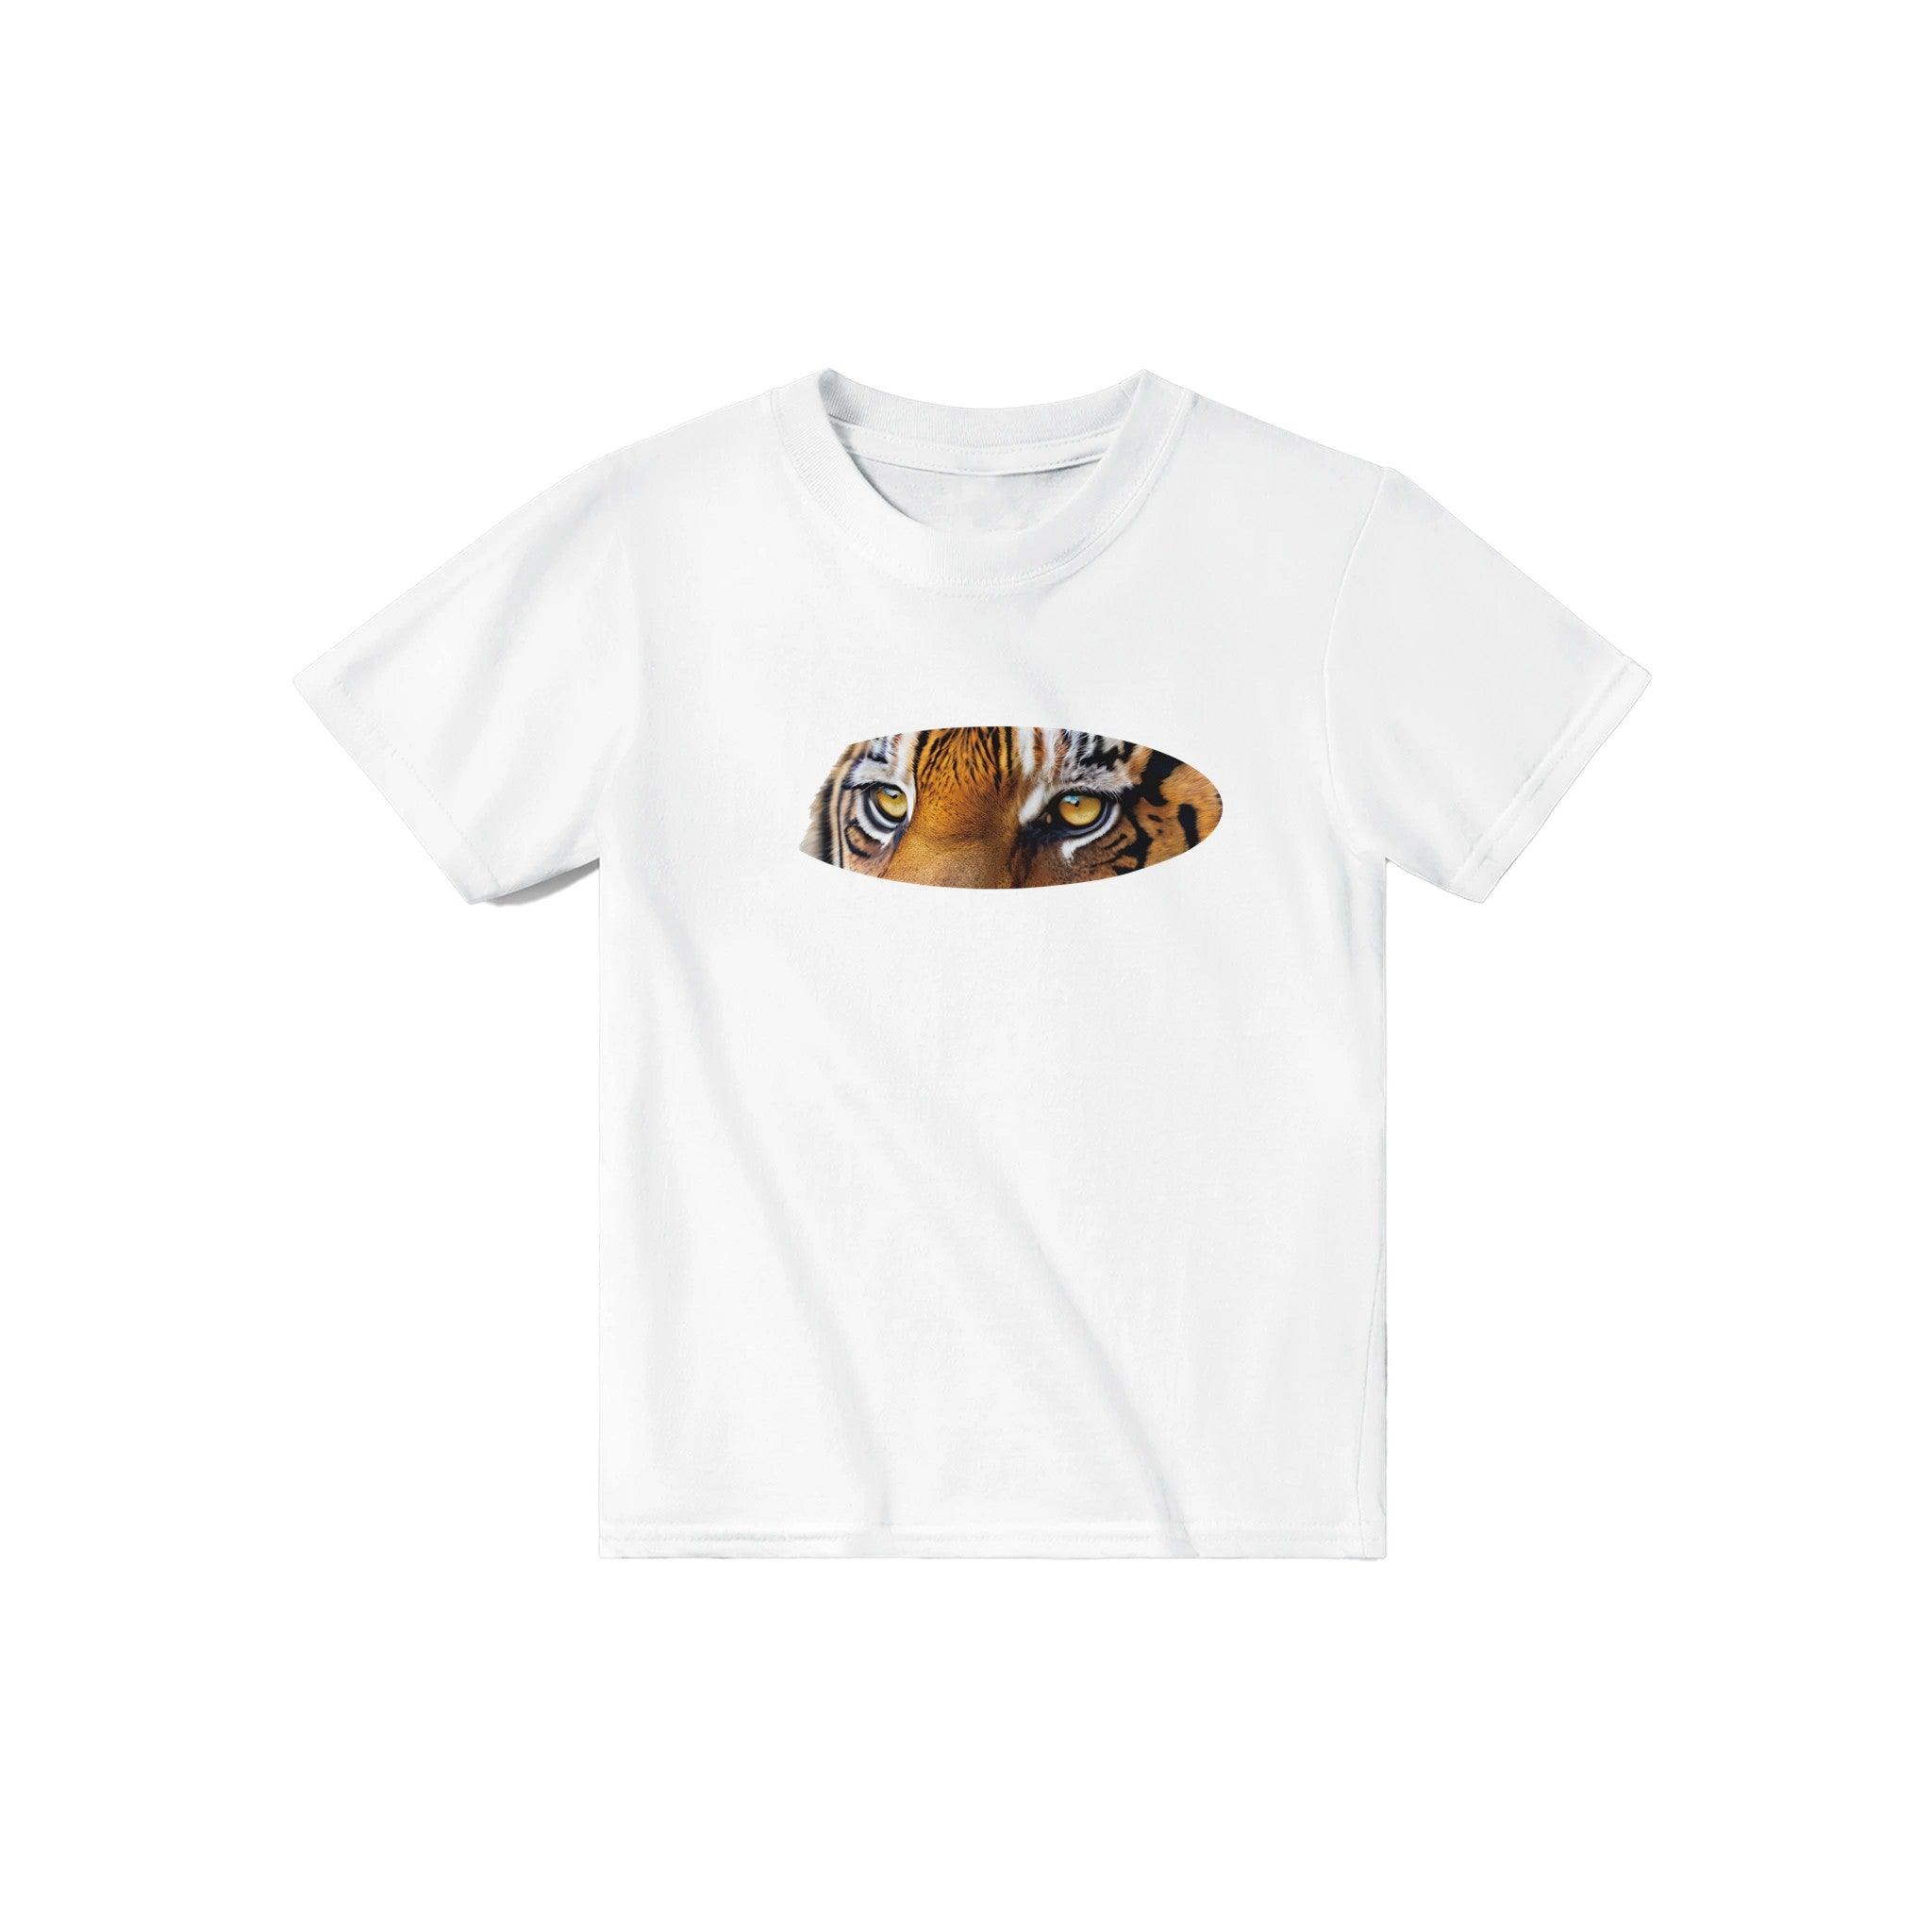 'Eye Of The Tiger' Baby Tee - POMA